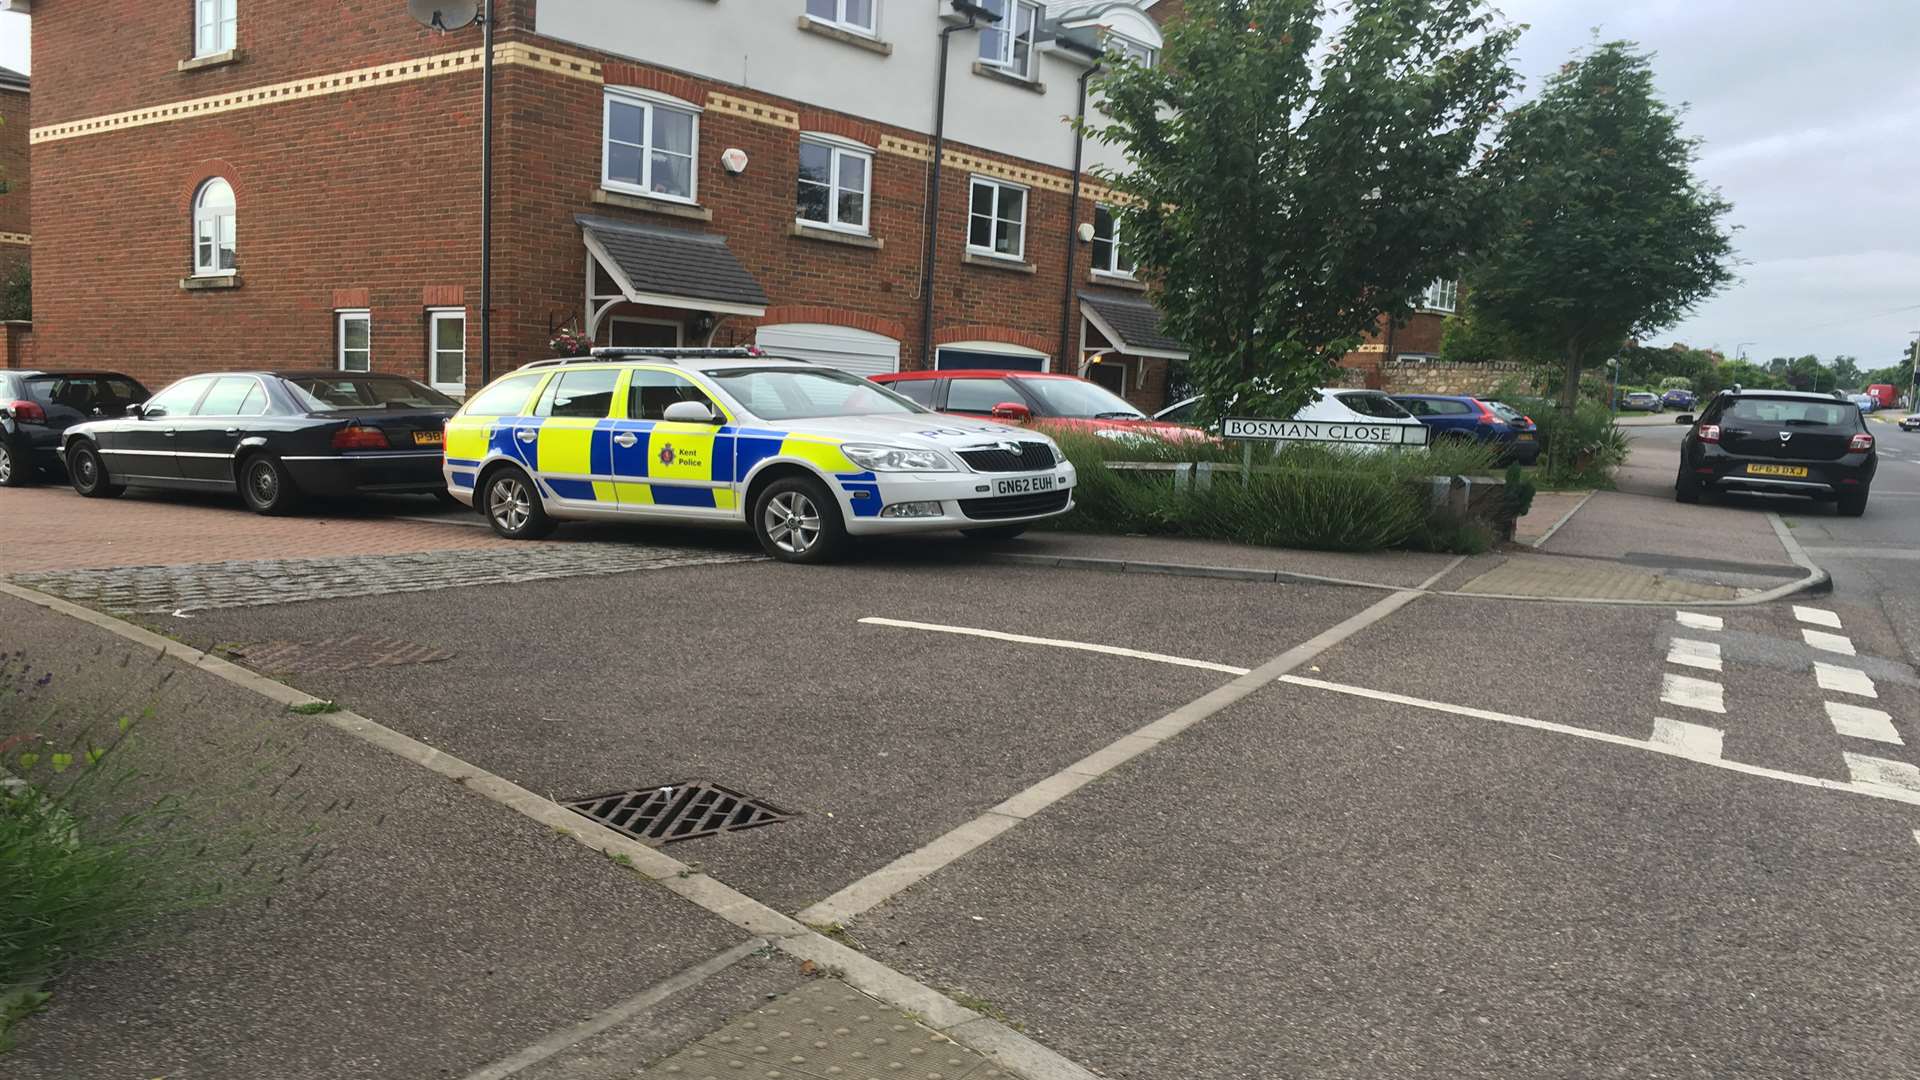 A woman was arrested in Farleigh Lane, close to the junction with Bosman Close